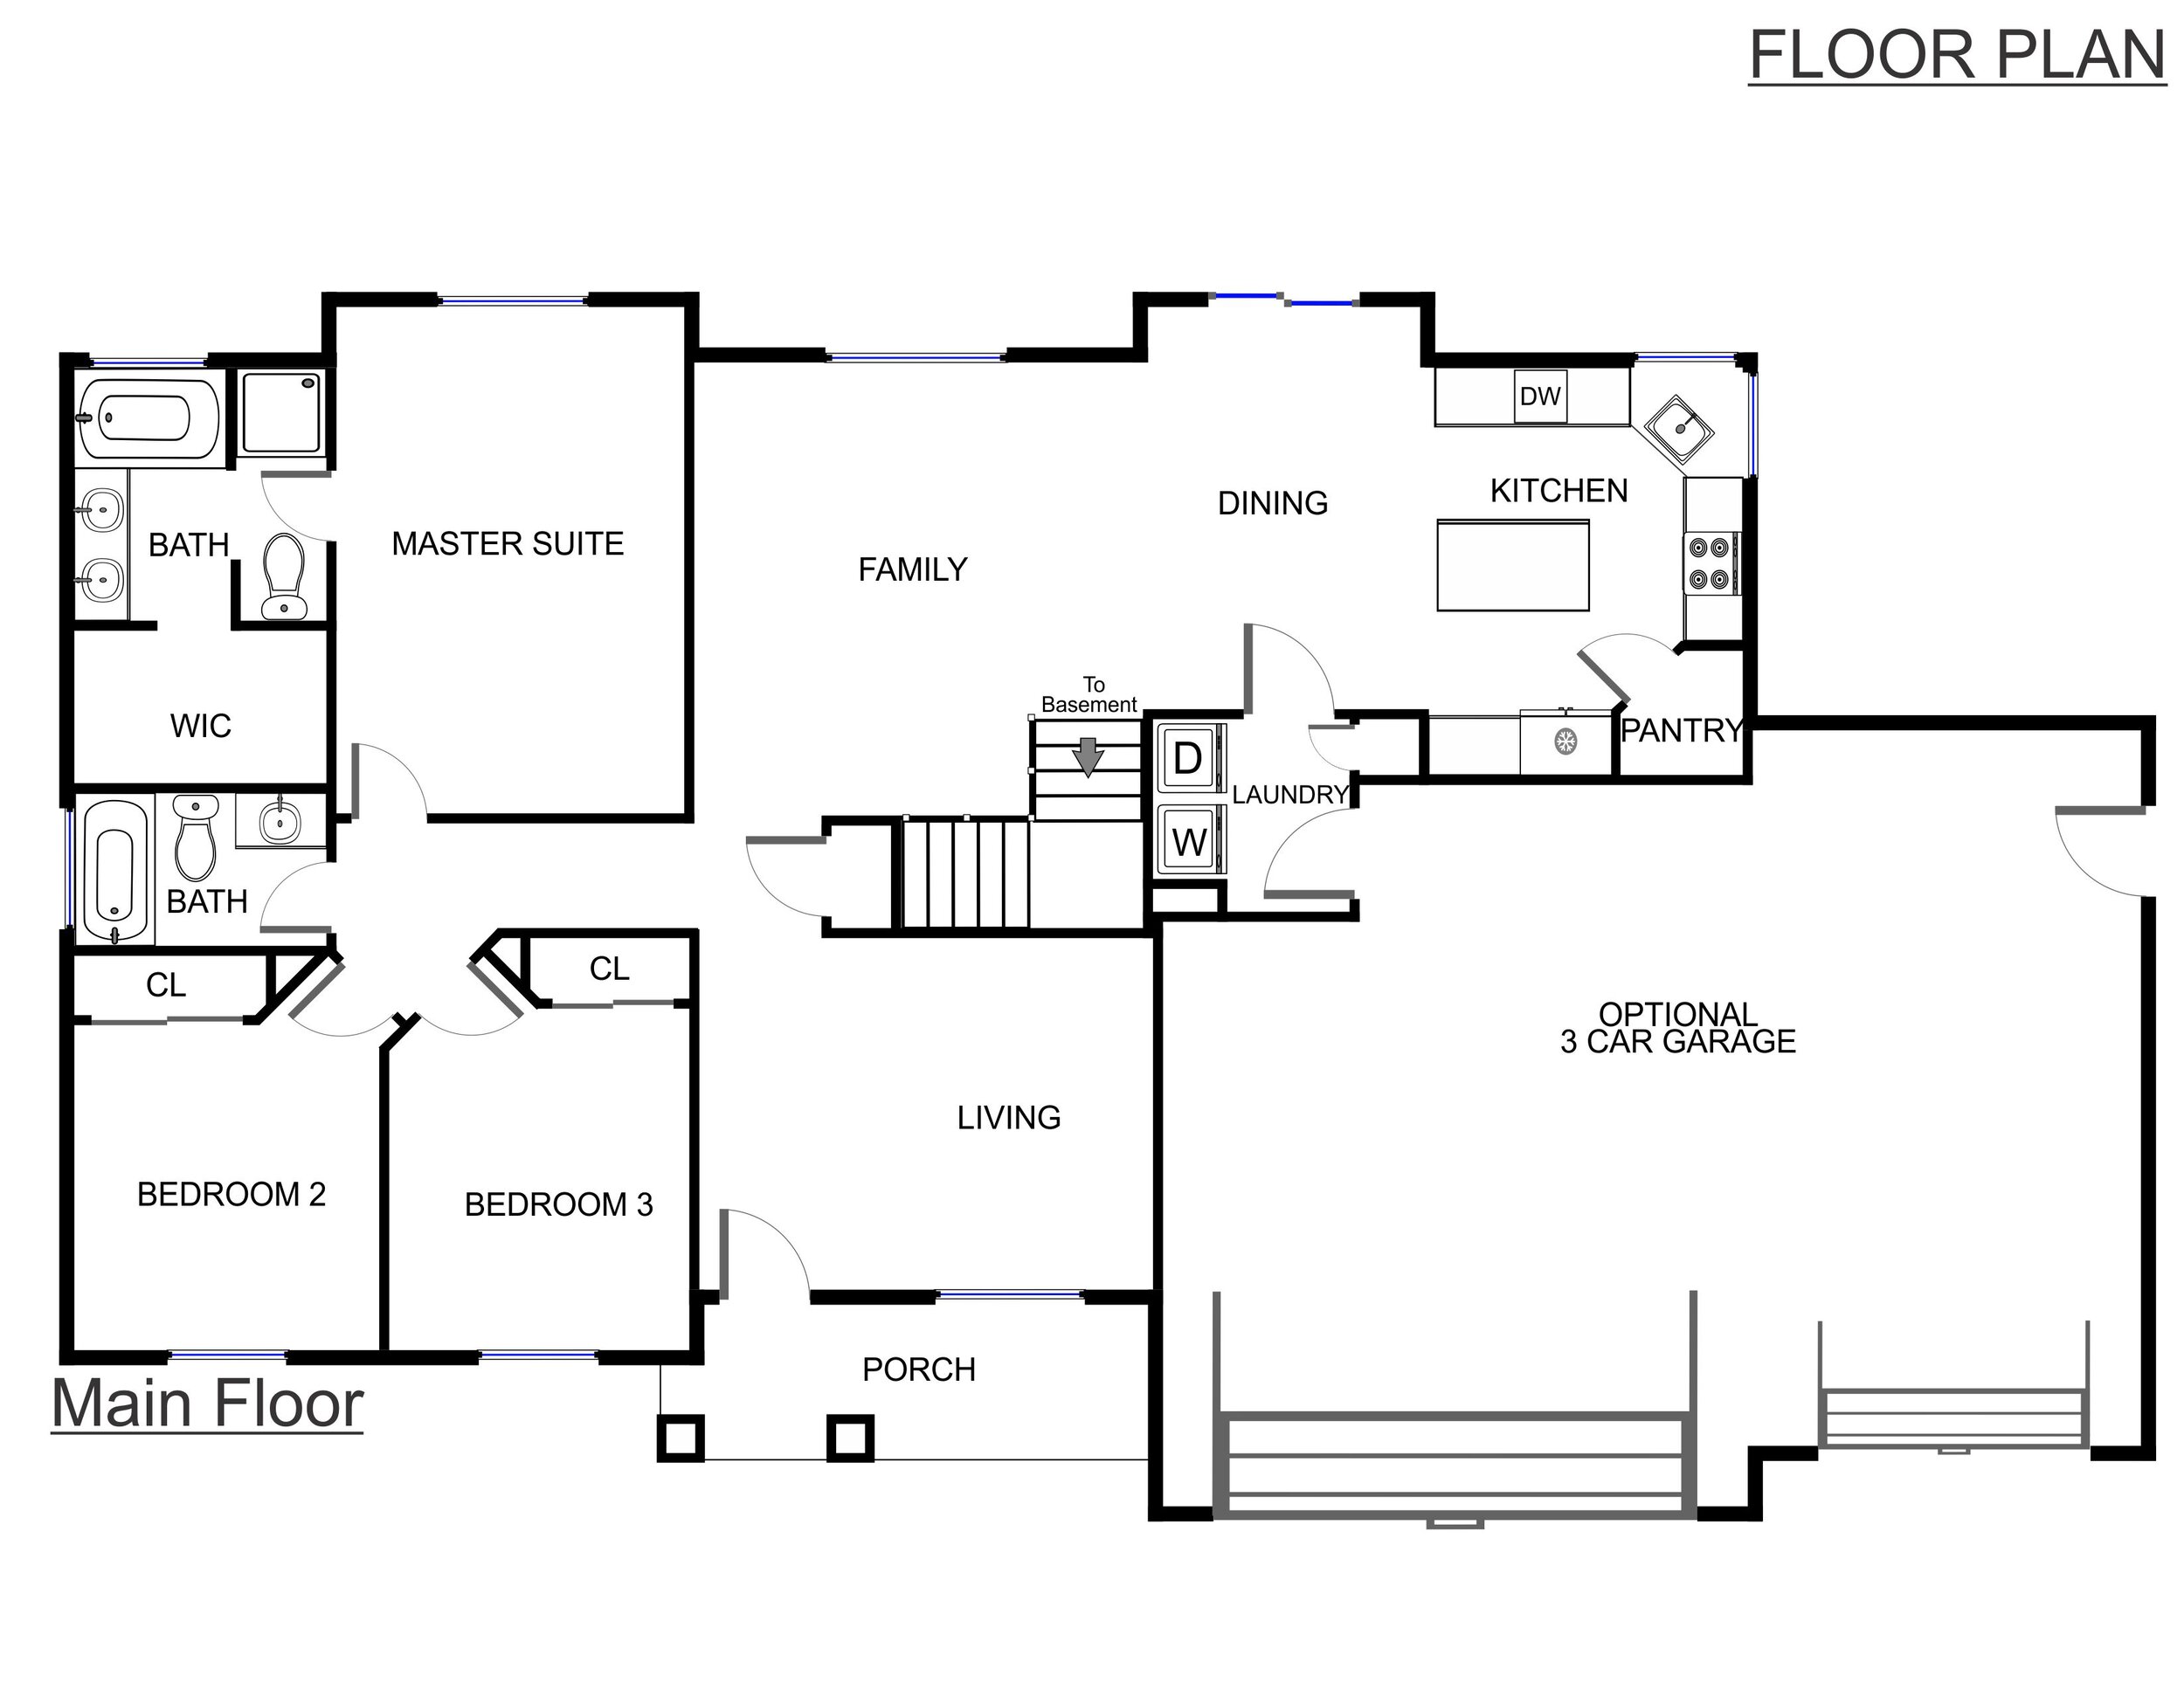 Approved Plans 331 02.jpg